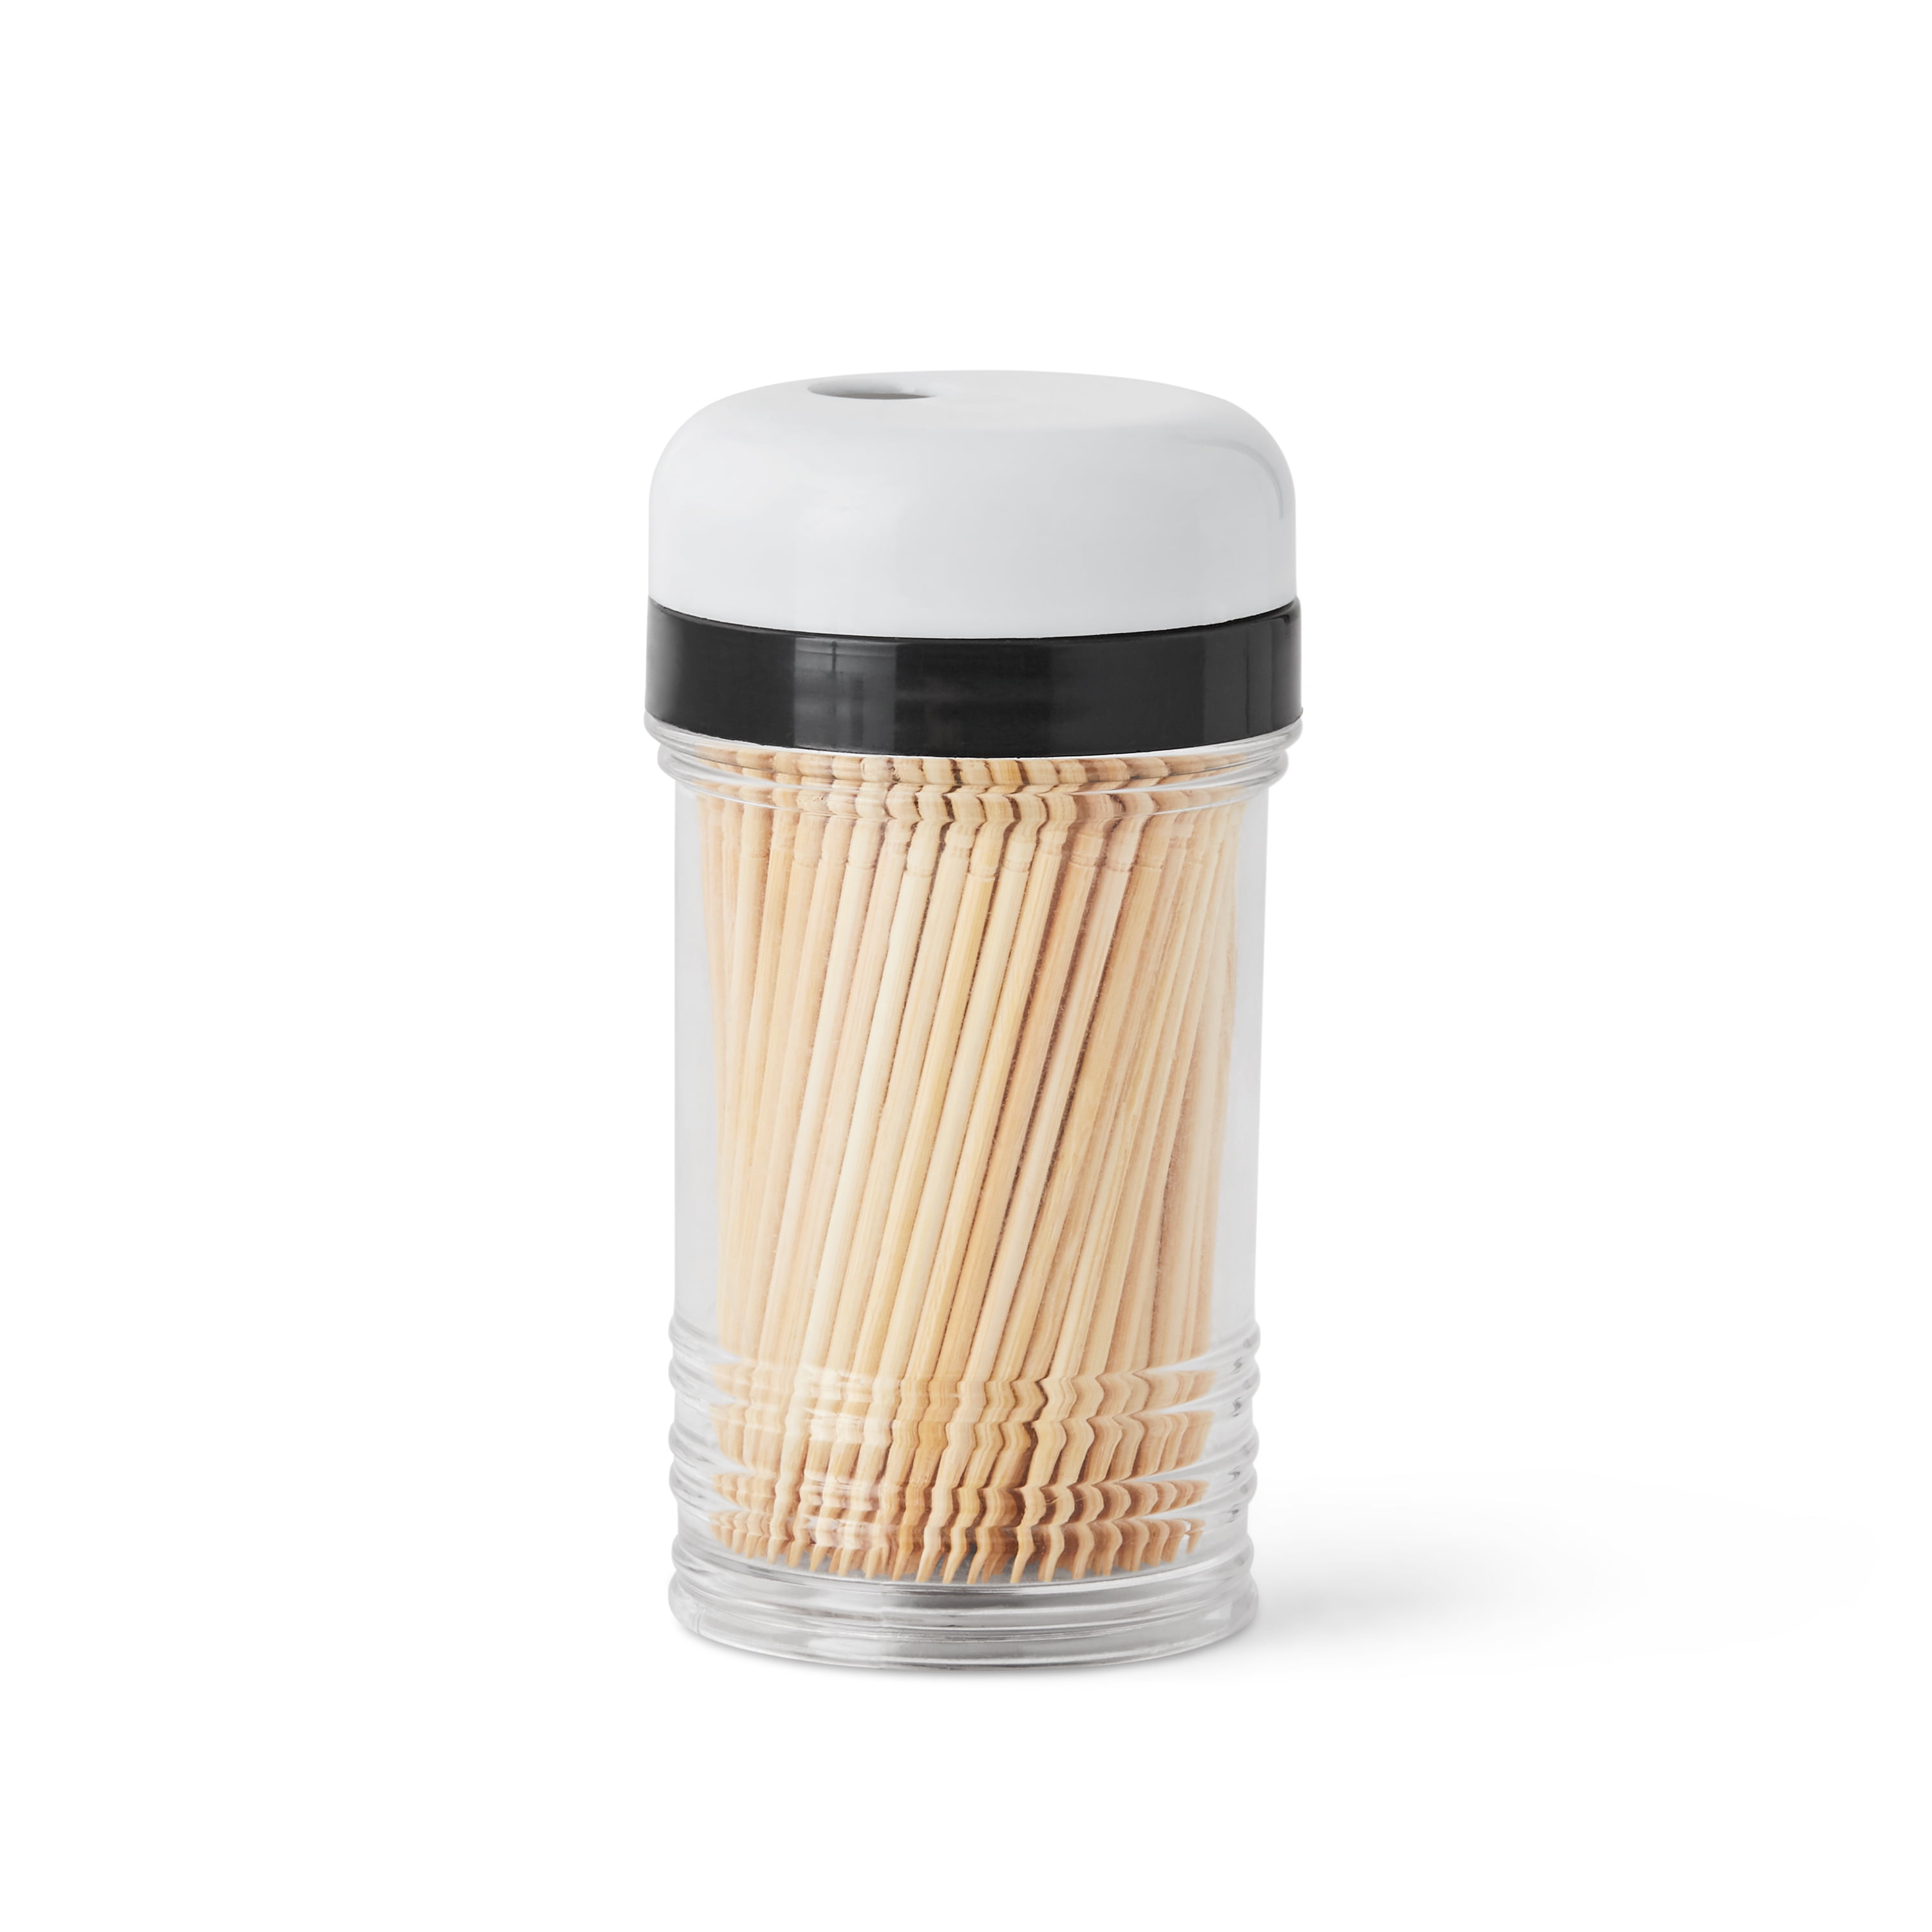 1000 Royal Plain Round Wood Toothpicks Individually Cellophane Wrapped Sealed 